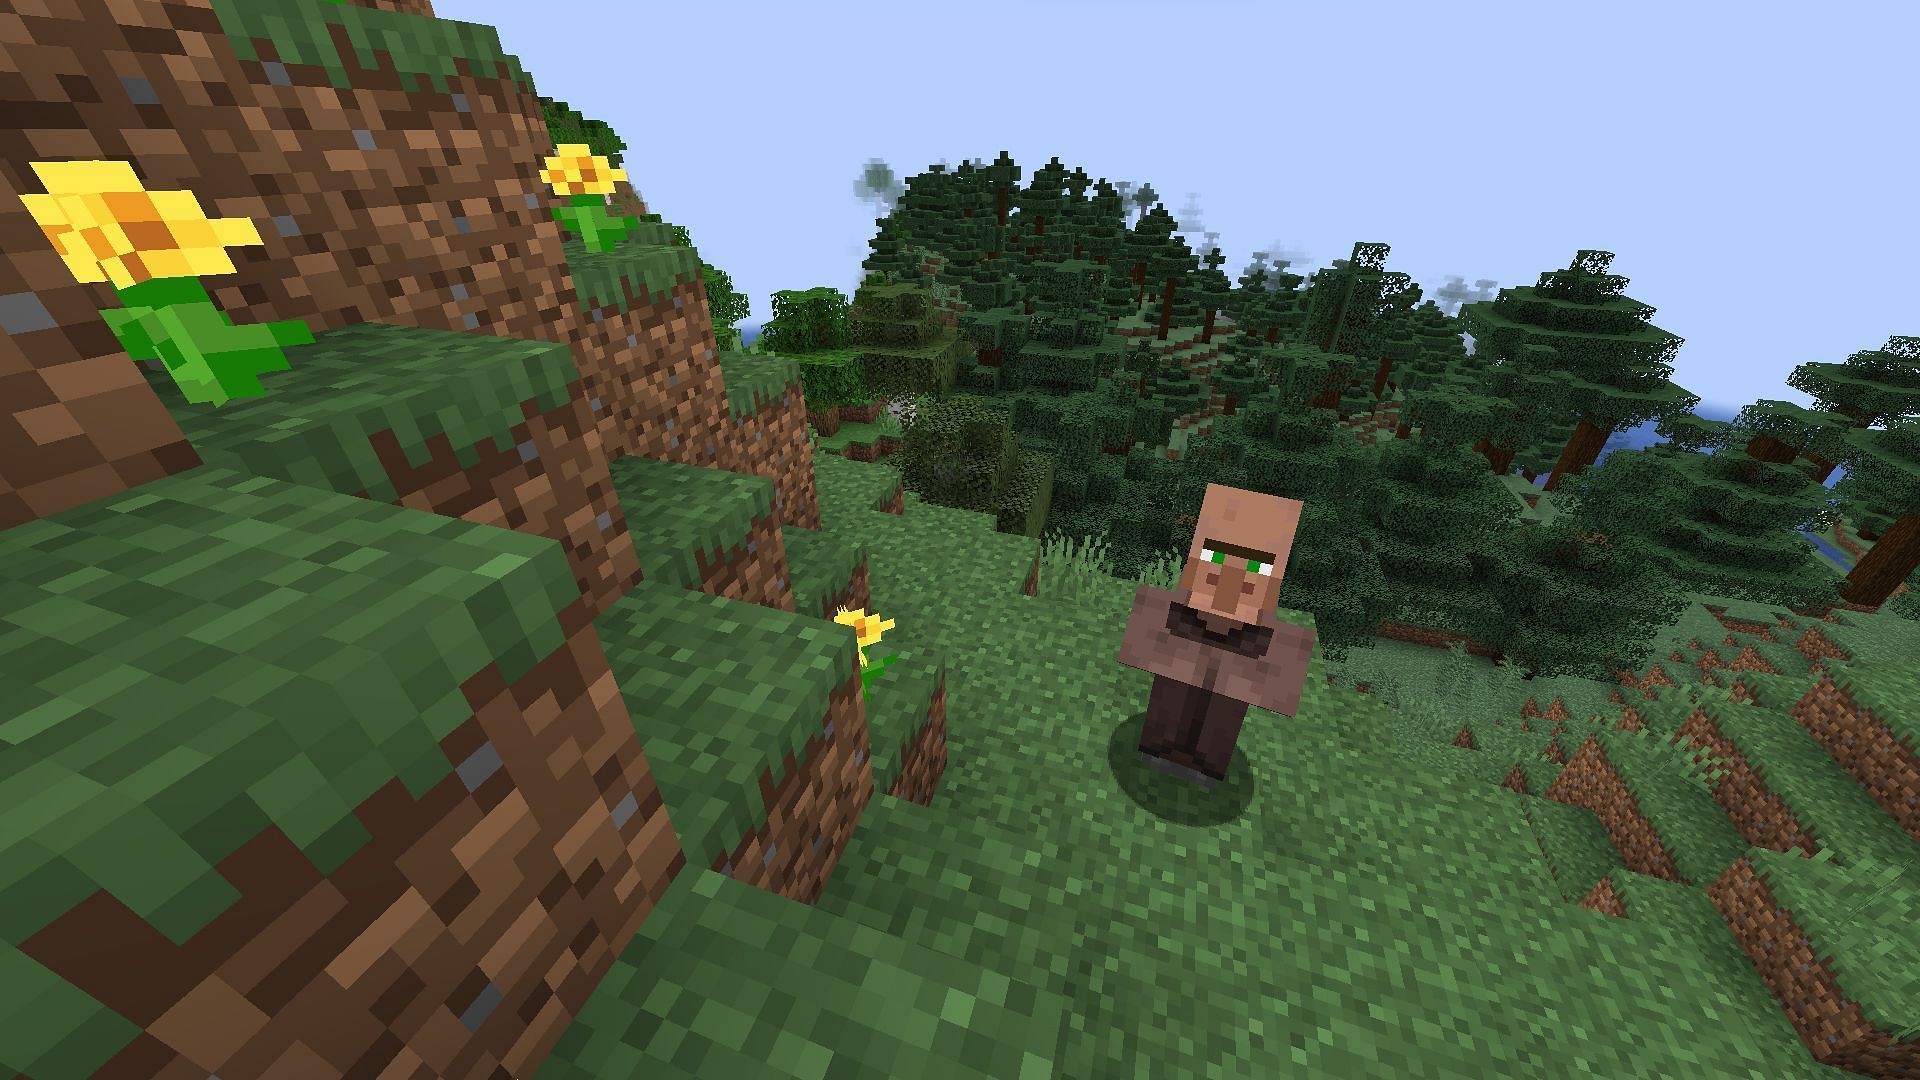 Transporting villagers in Minecraft can be tricky at times (Image via Mojang)